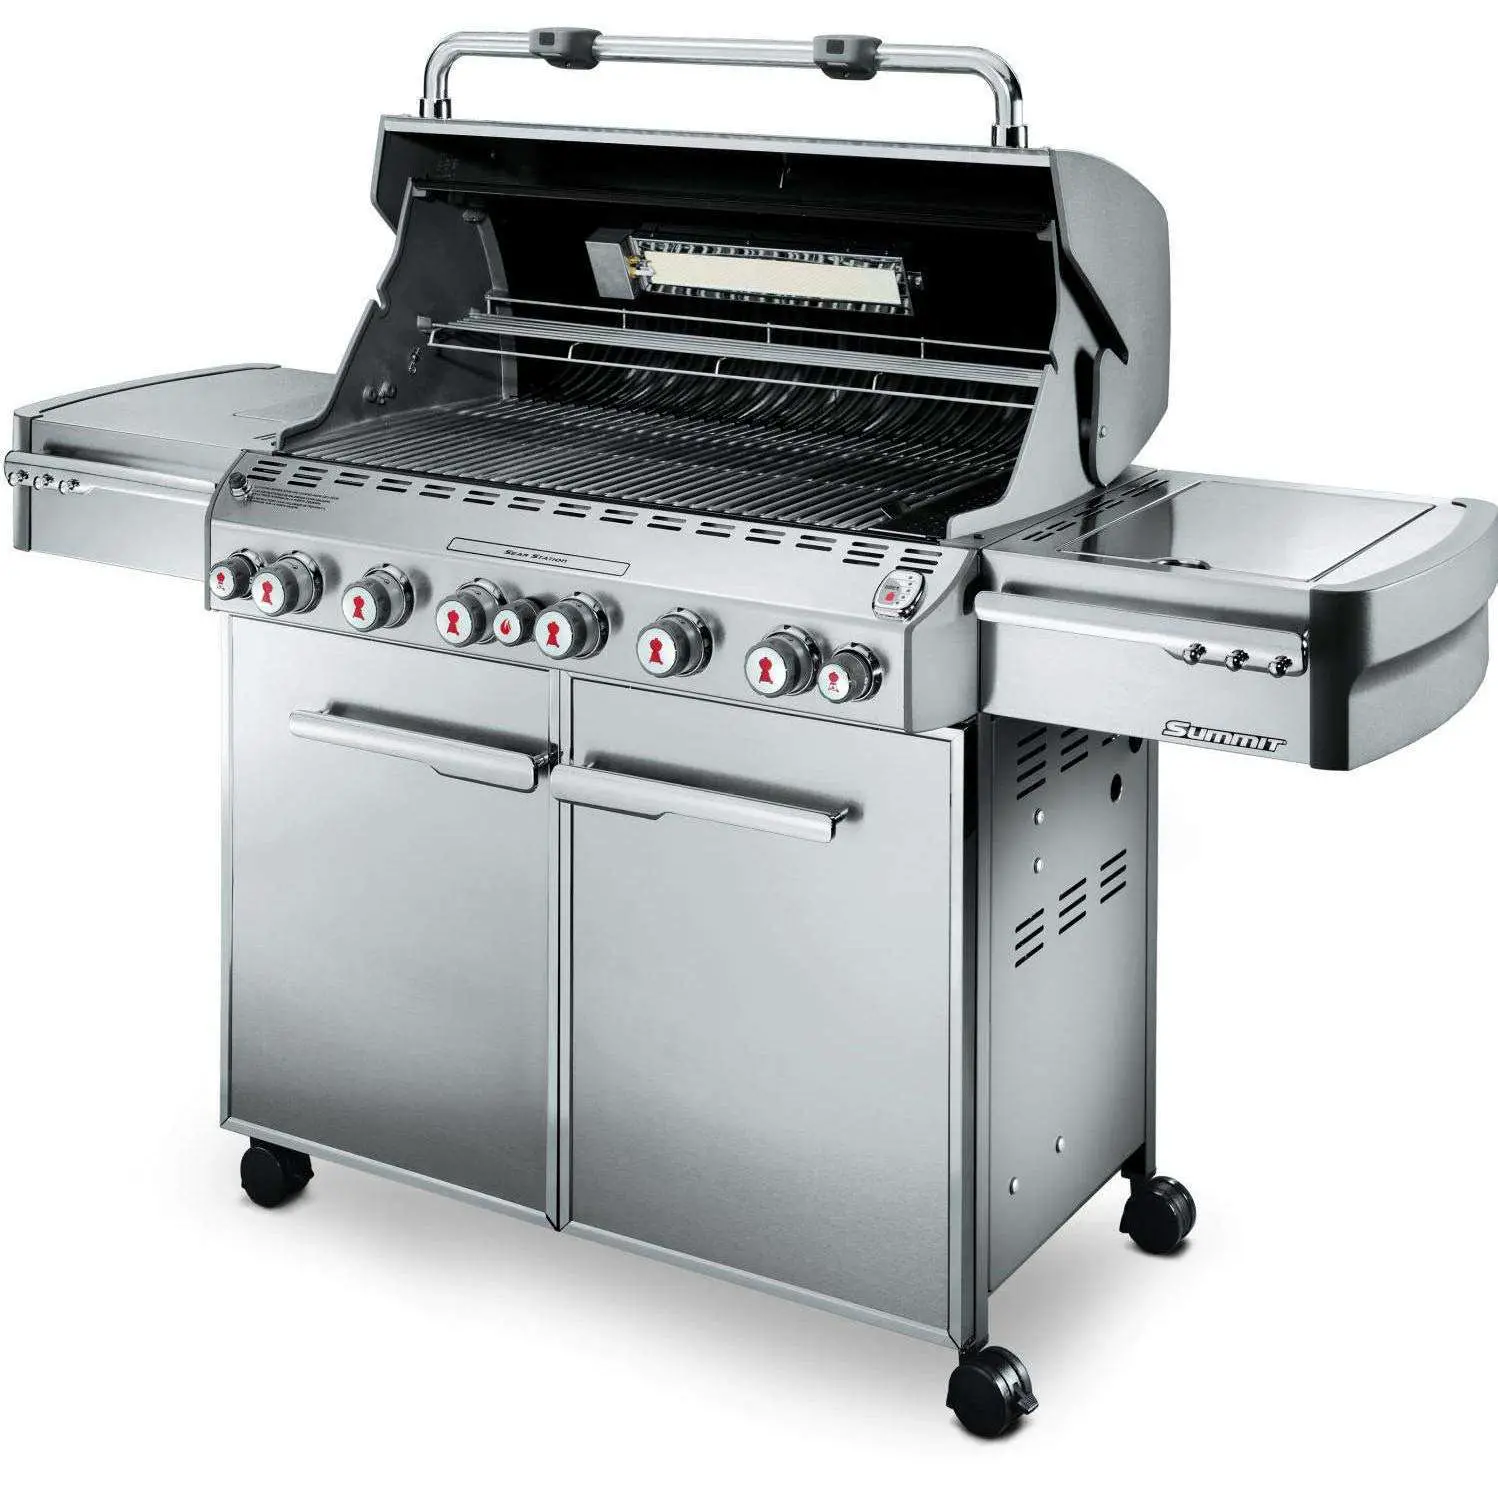 Best gas grills to buy: Broil King, Weber, Napoleon, and more